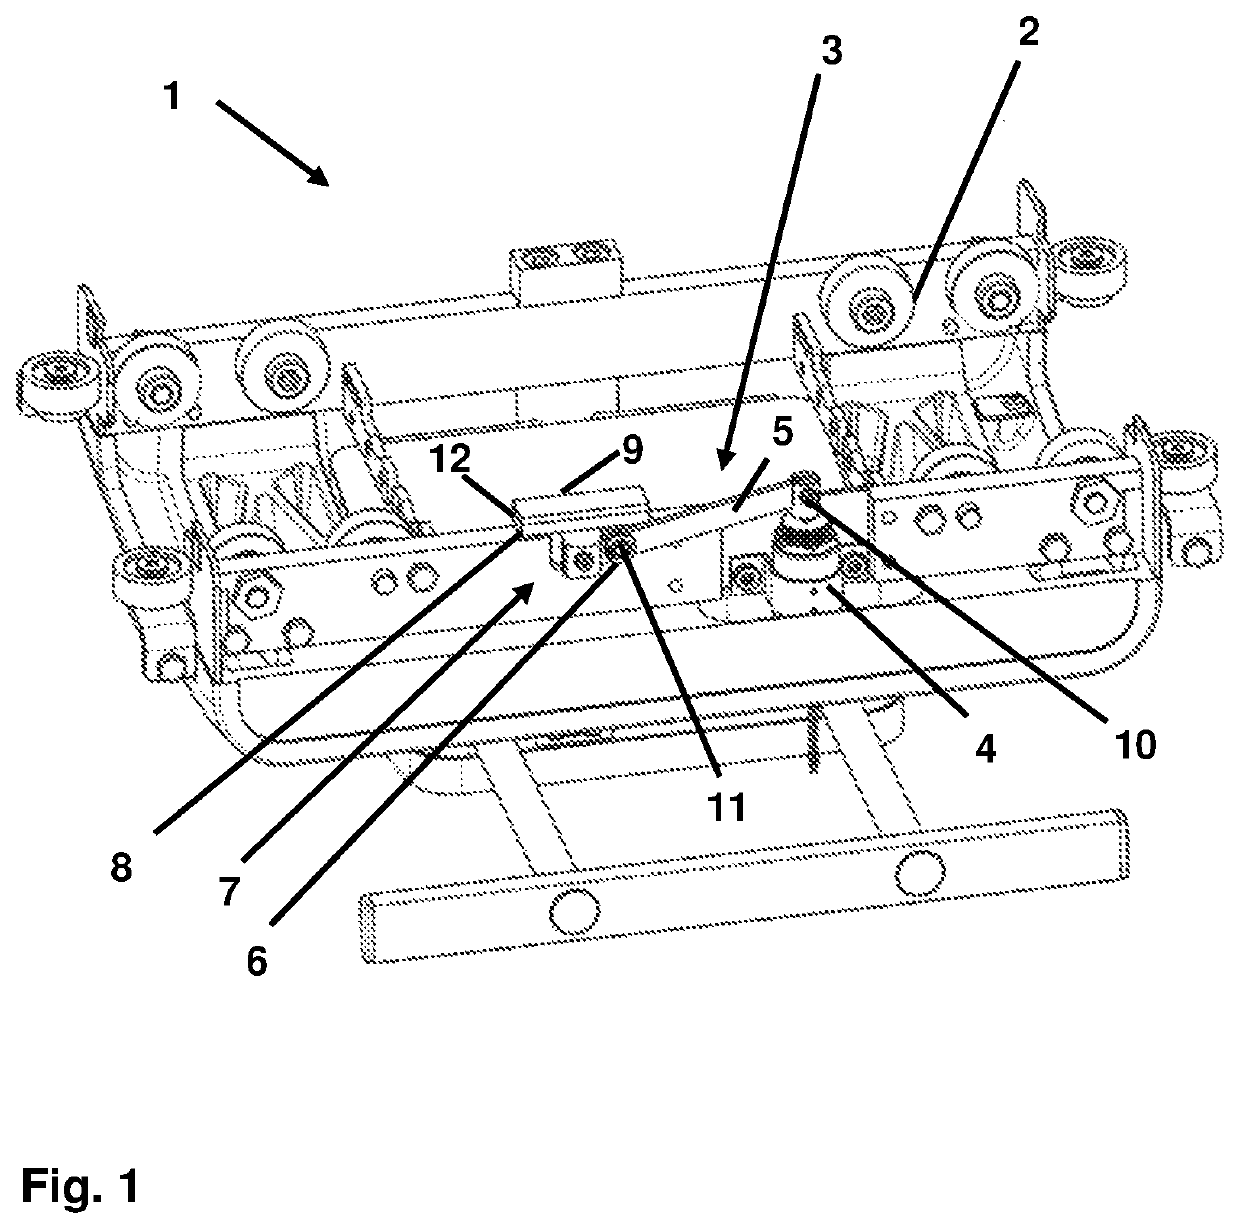 Beam-mounted supply unit for fastening medical devices to a ceiling